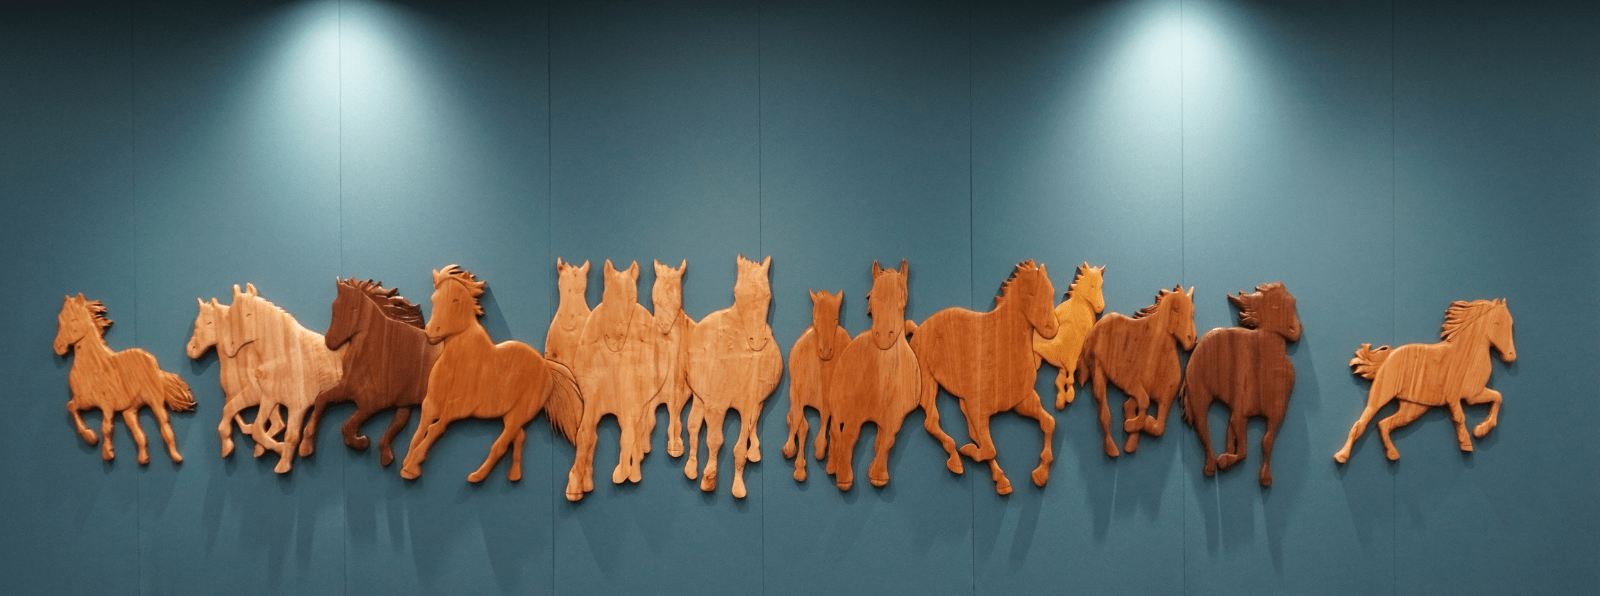 A wood sculpture displayed against the wall of galloping horses.